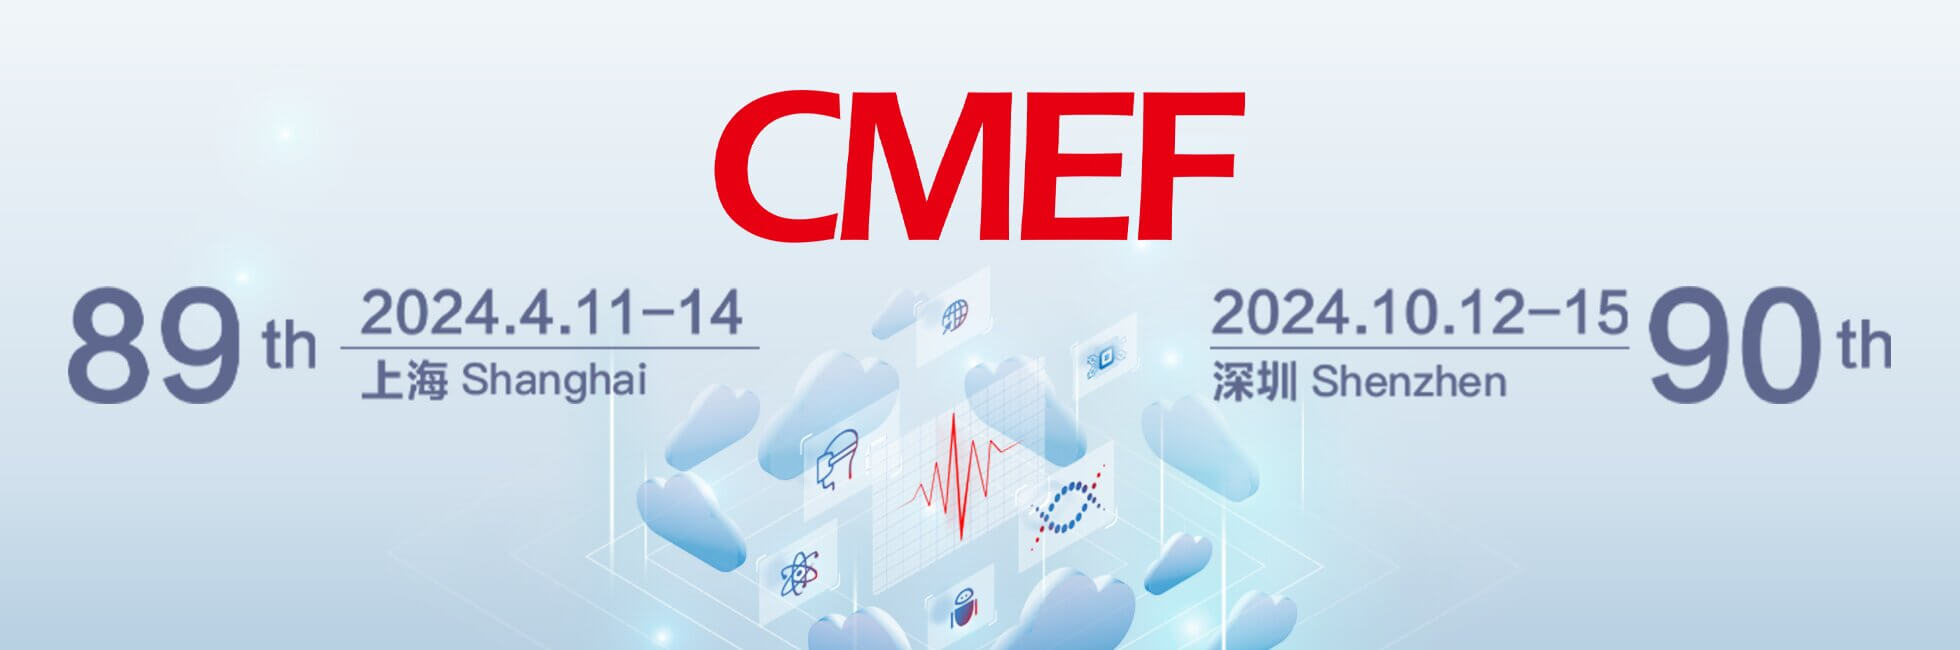 We will attend CMEF 2024 in Shanghai, welcome visit our booth below